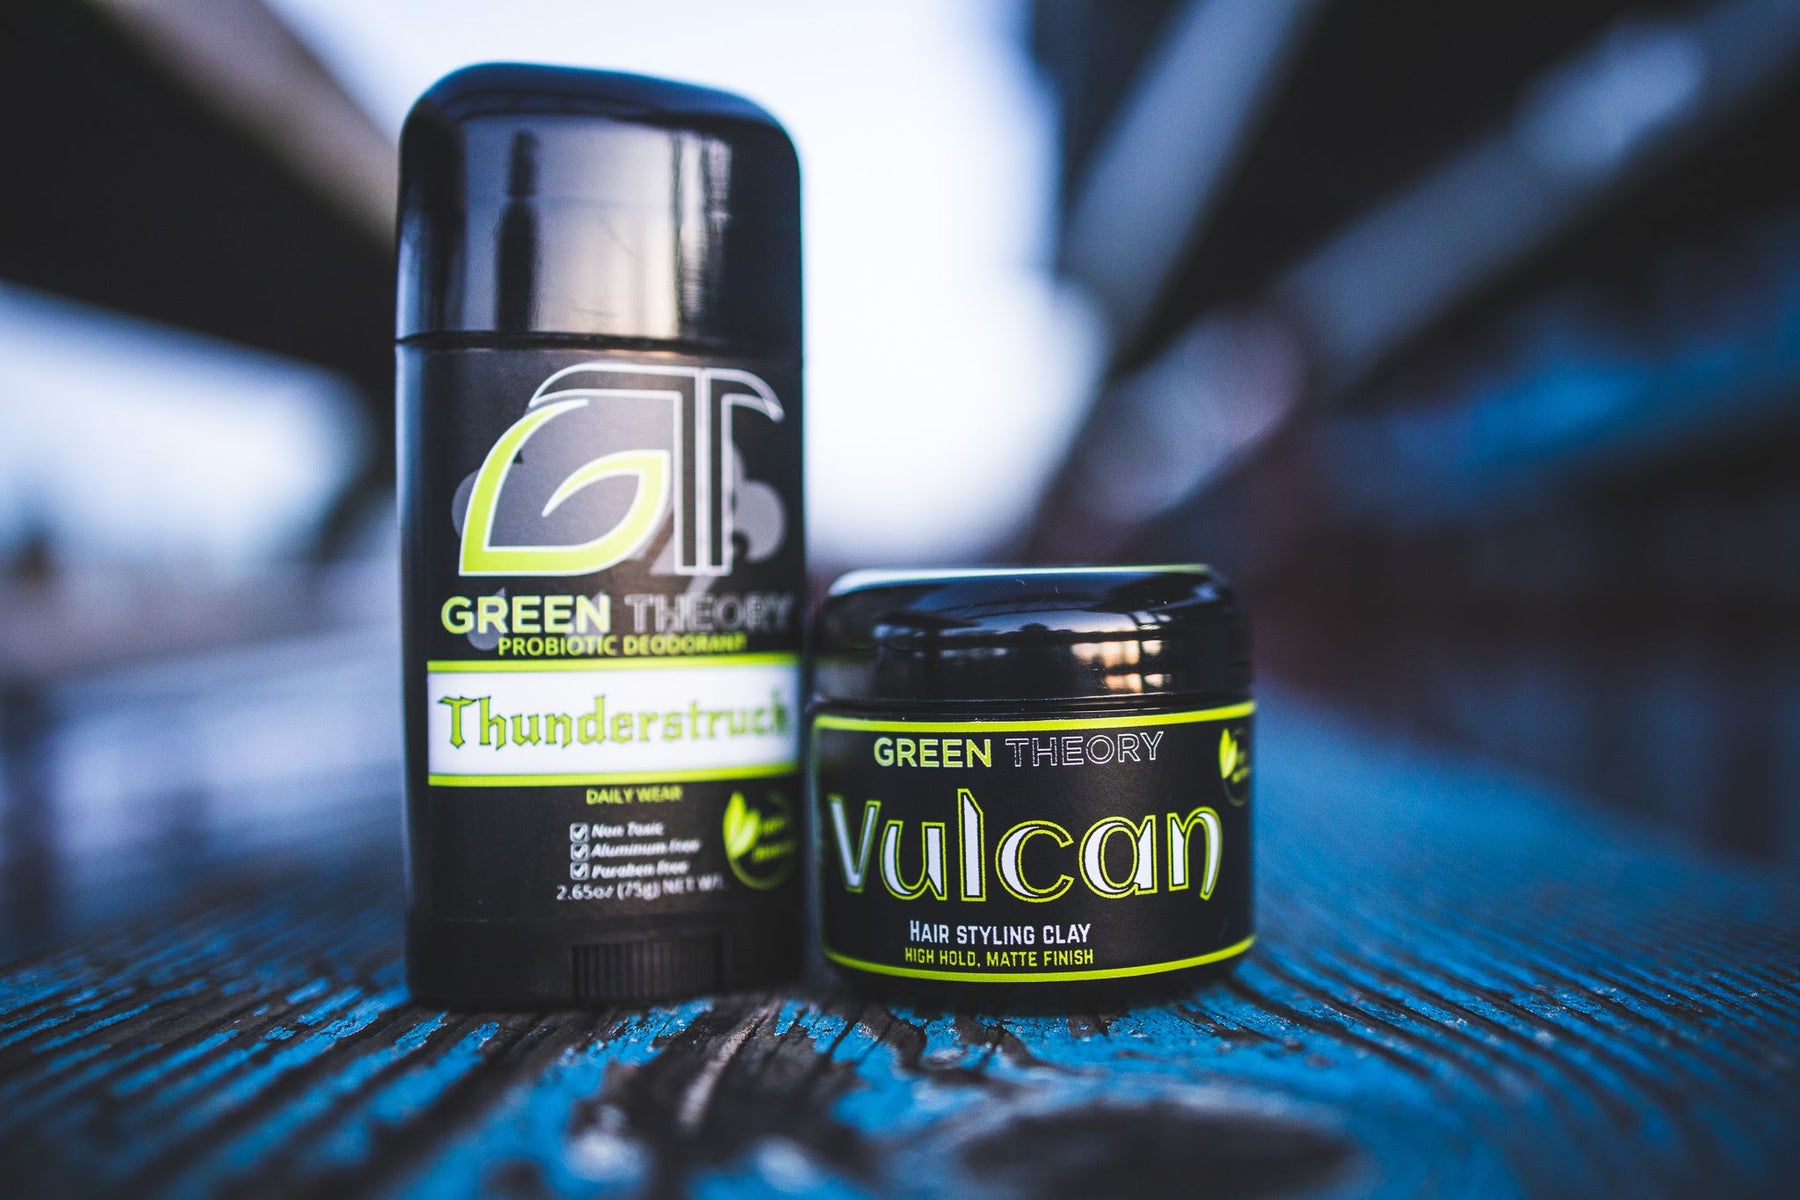 photograph of a stick of Green Theory's Thunderstuck probiotic, aluminum free deodorant and a jar of Vulcan hair styling clay sitting on a blue wood grain